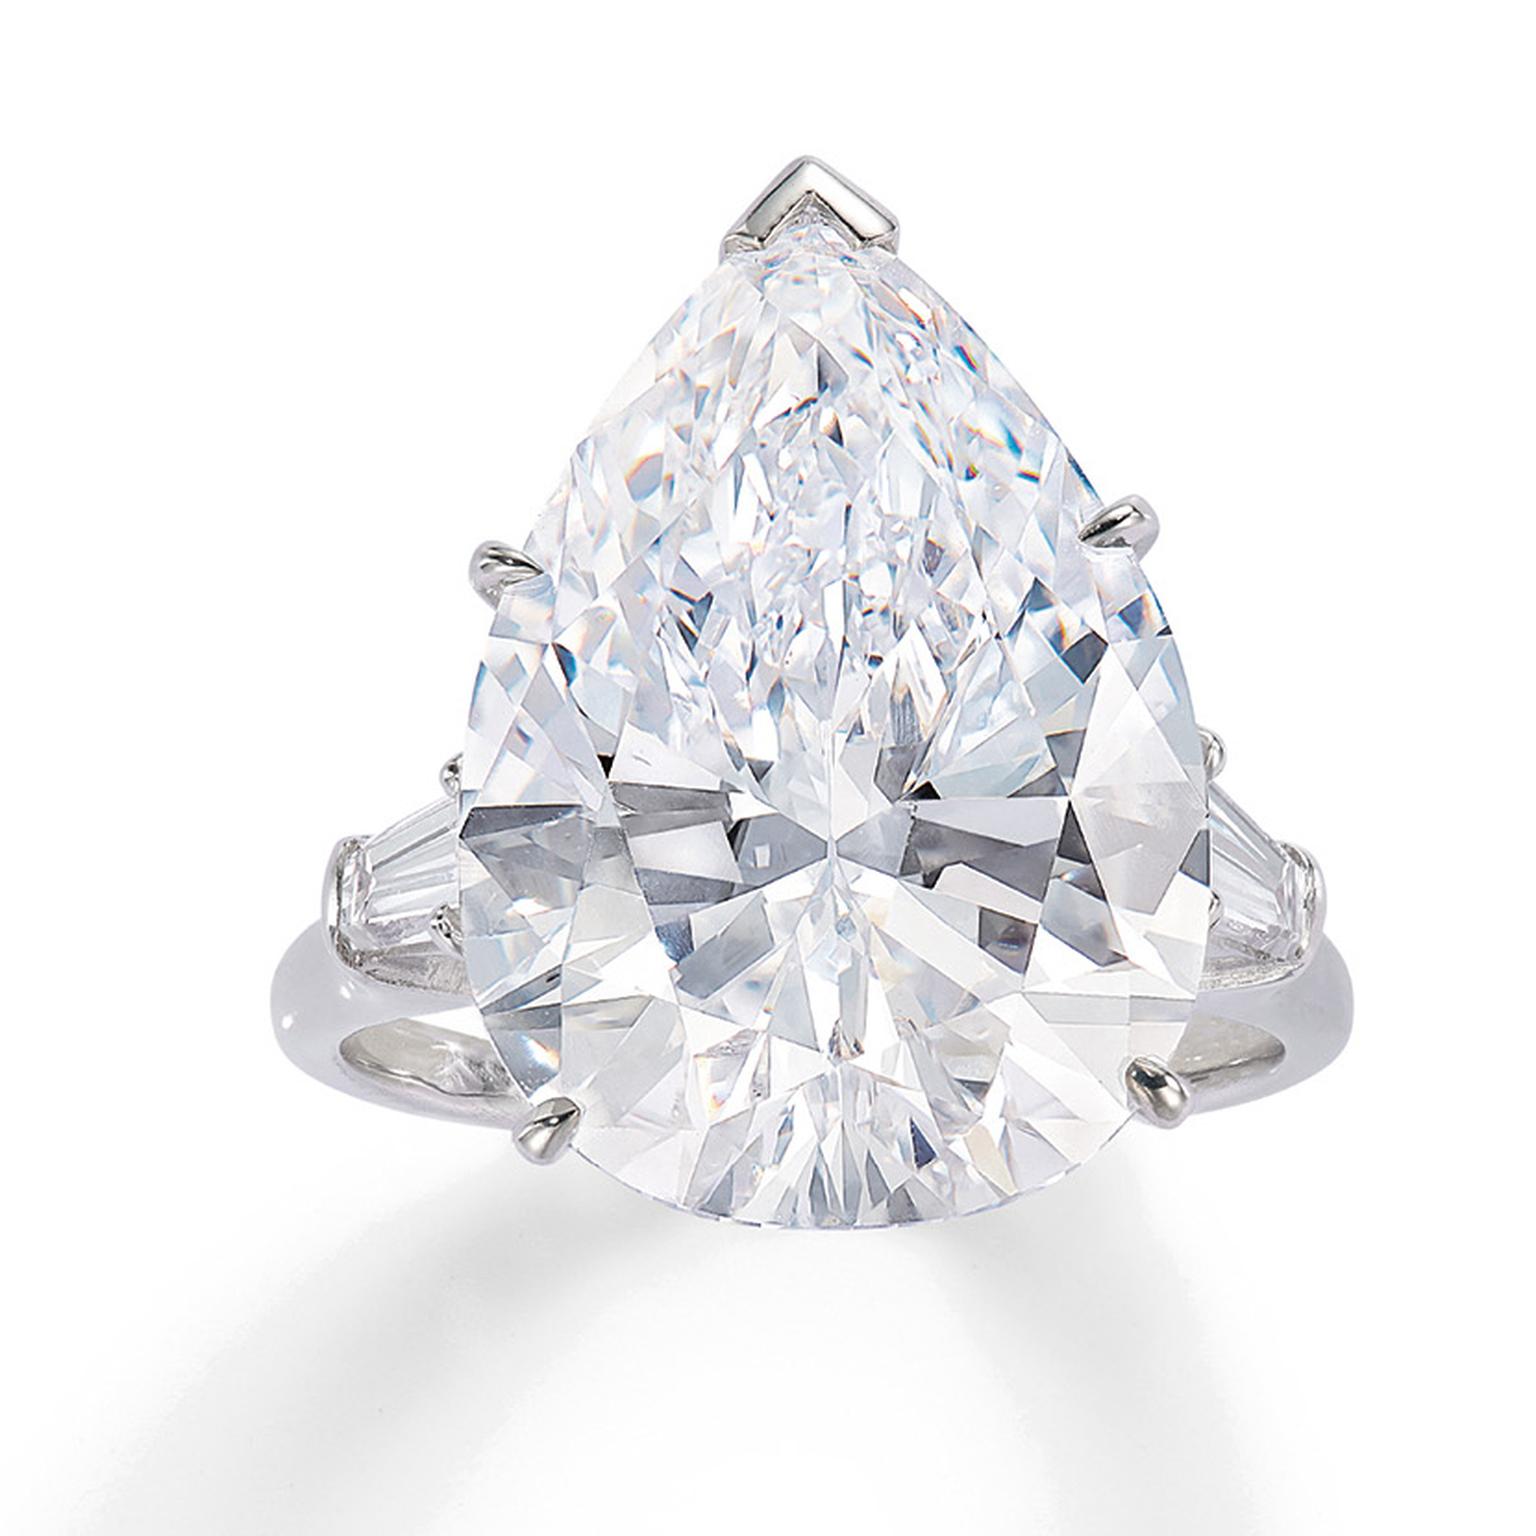 Lot 579 diamond ring for Phillips auction